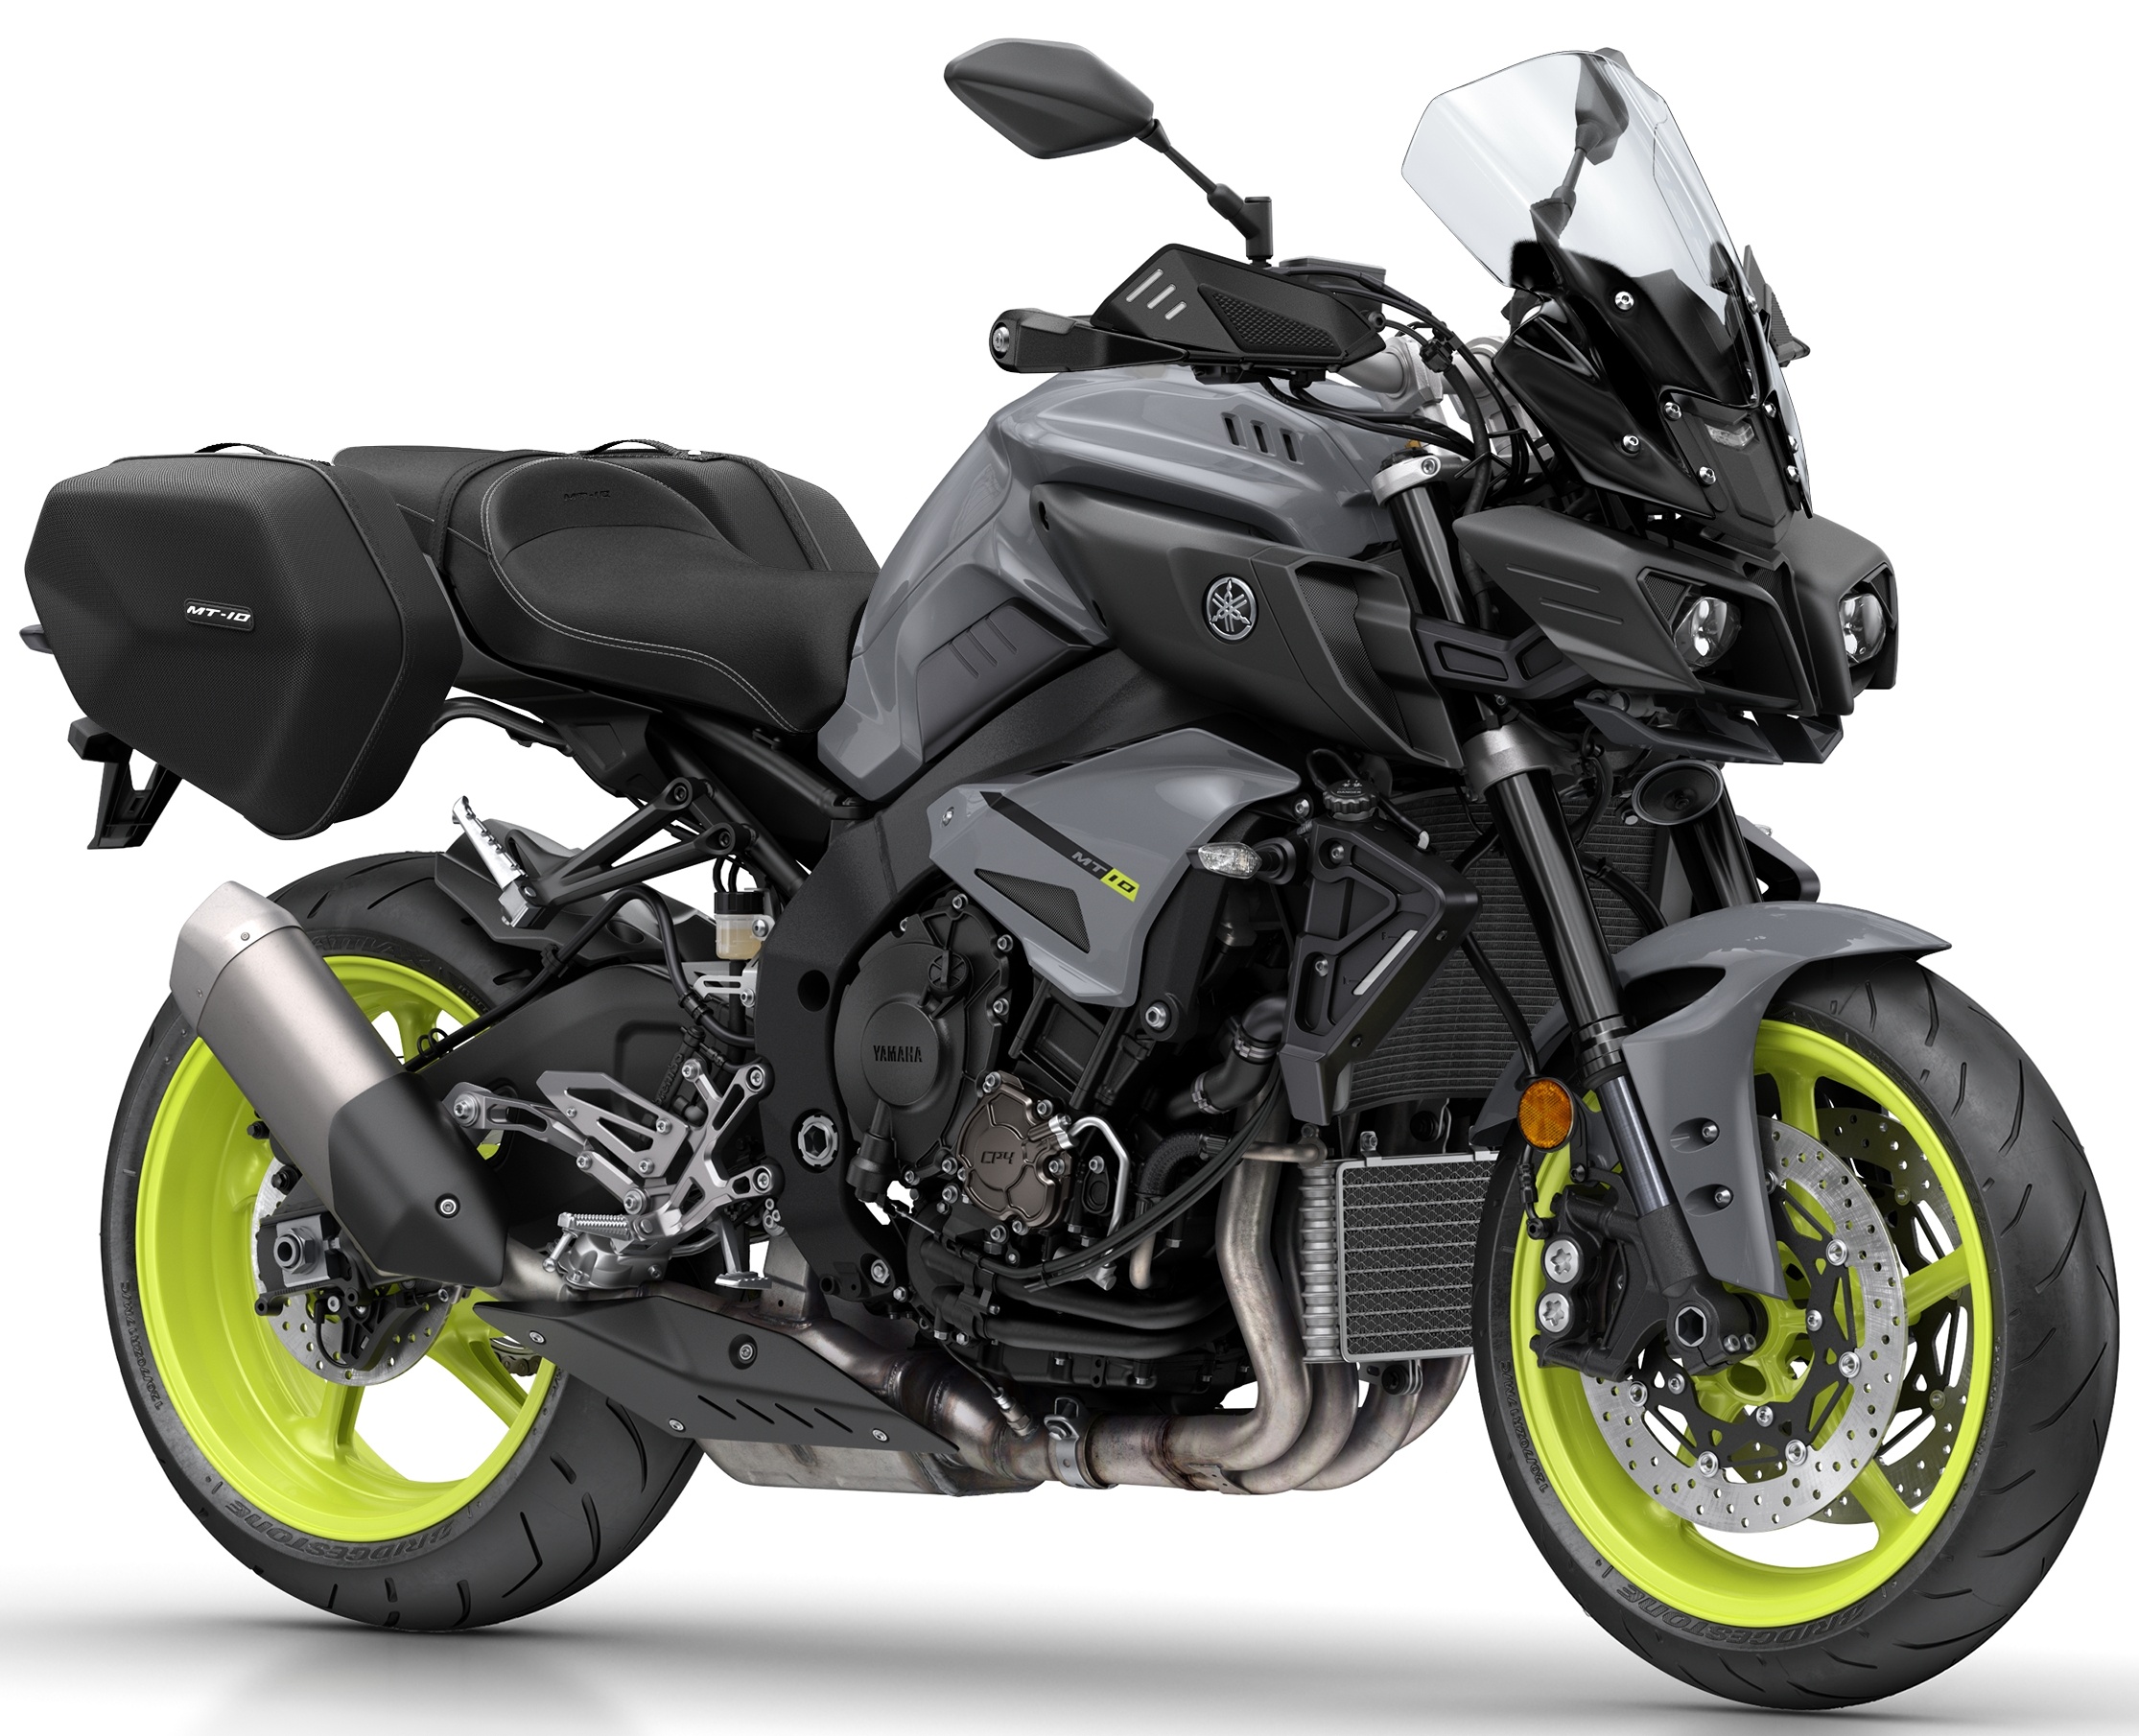 2017 Yamaha MT-10 Tourer in Europe this March - paultan.org